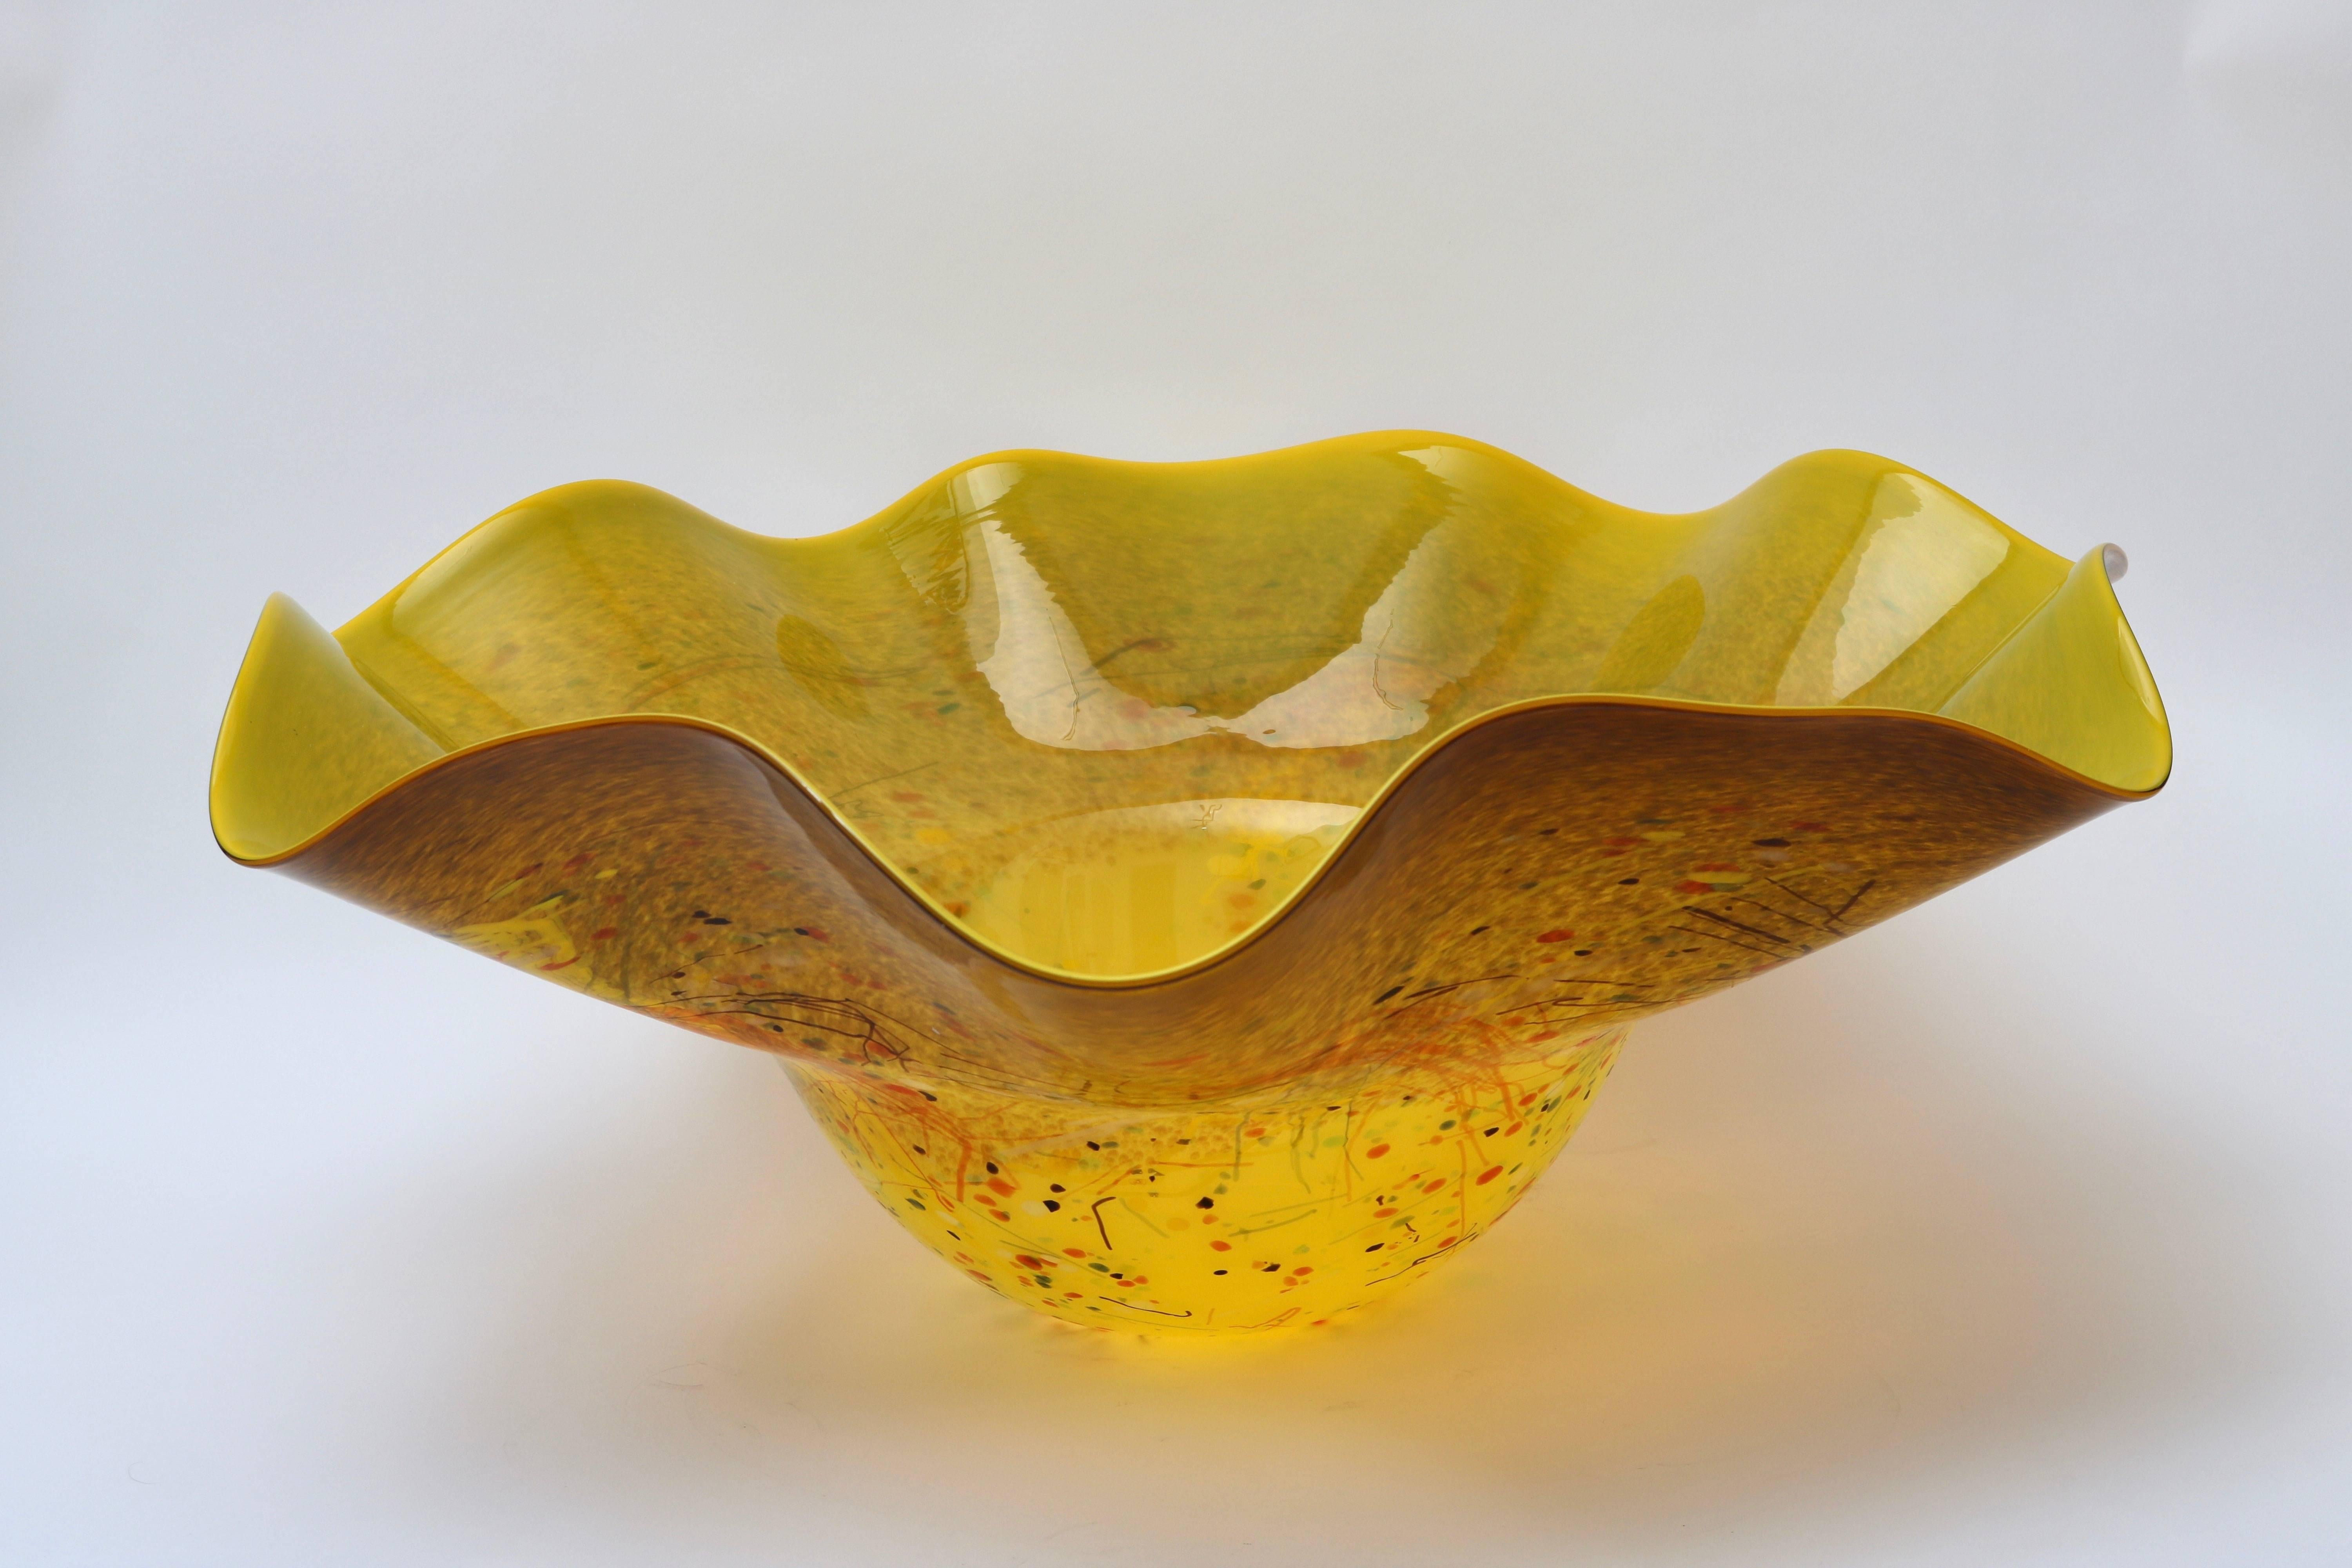 This stylish art glass bowl is very much in the style of pieces created by Dale Chihuly and was recently purchased from a Palm Beach estate. The free-form has stylized floral form and has a golden marigold coloration with flecs of color